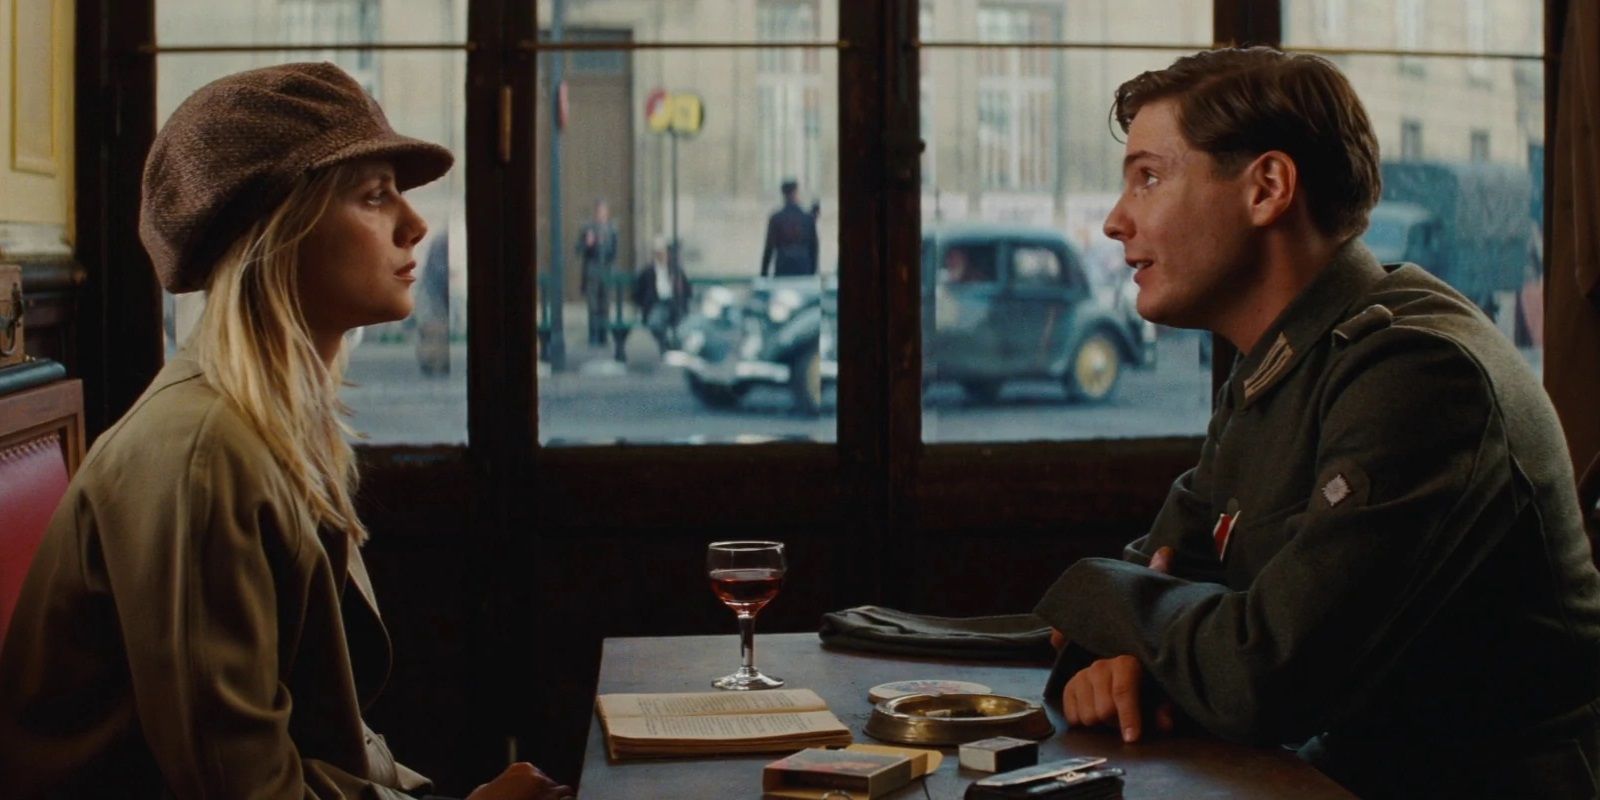 Shosanna and Fredrick in a cafe in Inglourious Basterds